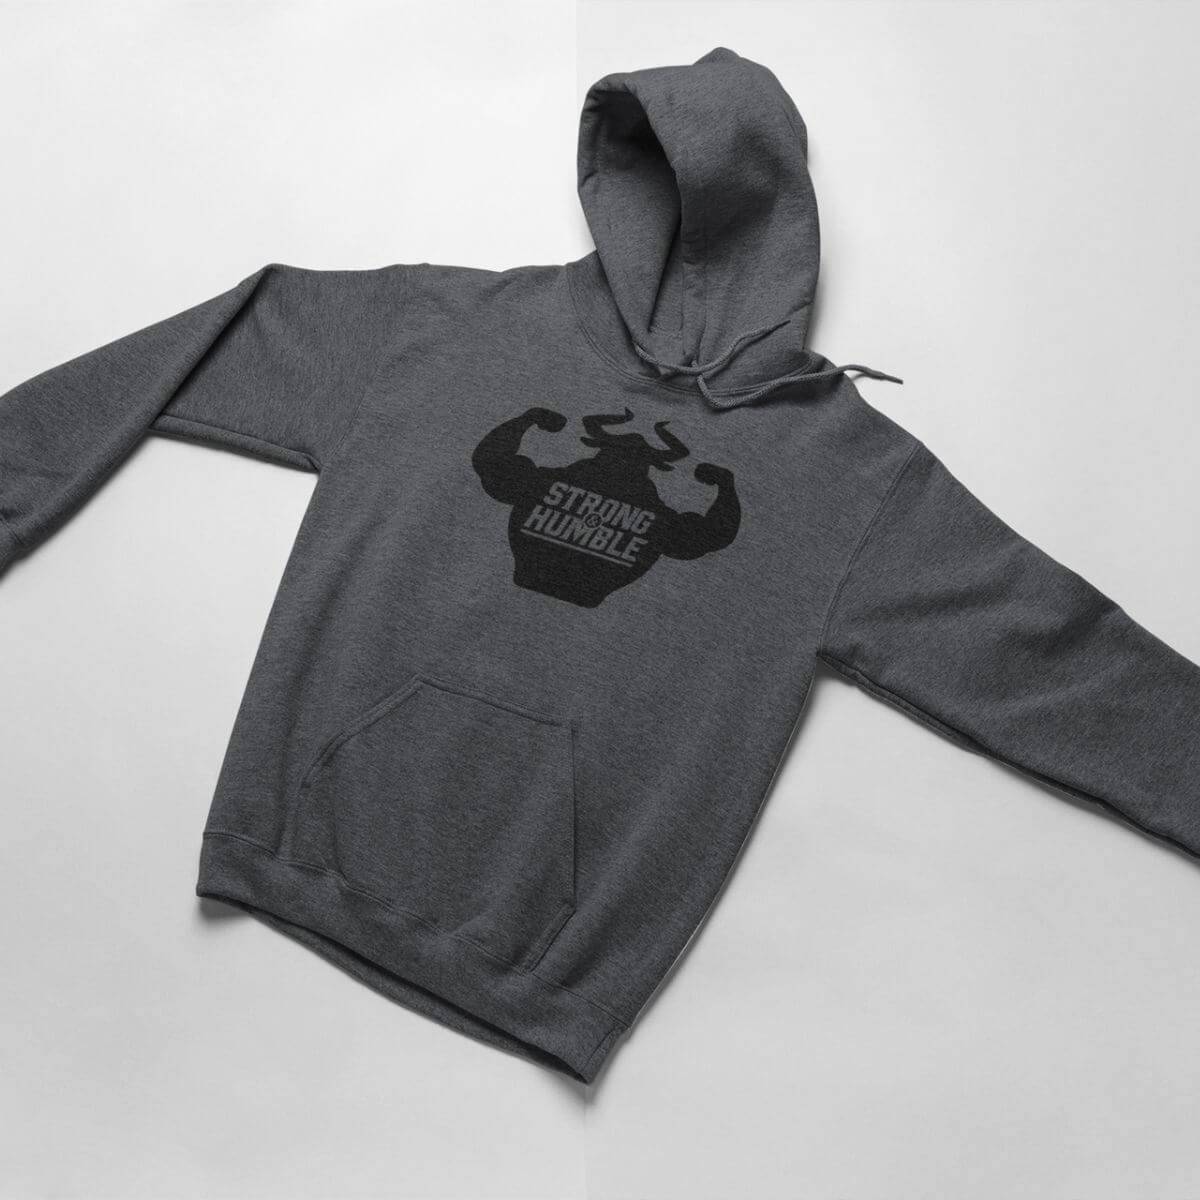 Classic Strong and Humble Women's Dark Heather Grey Hoodie